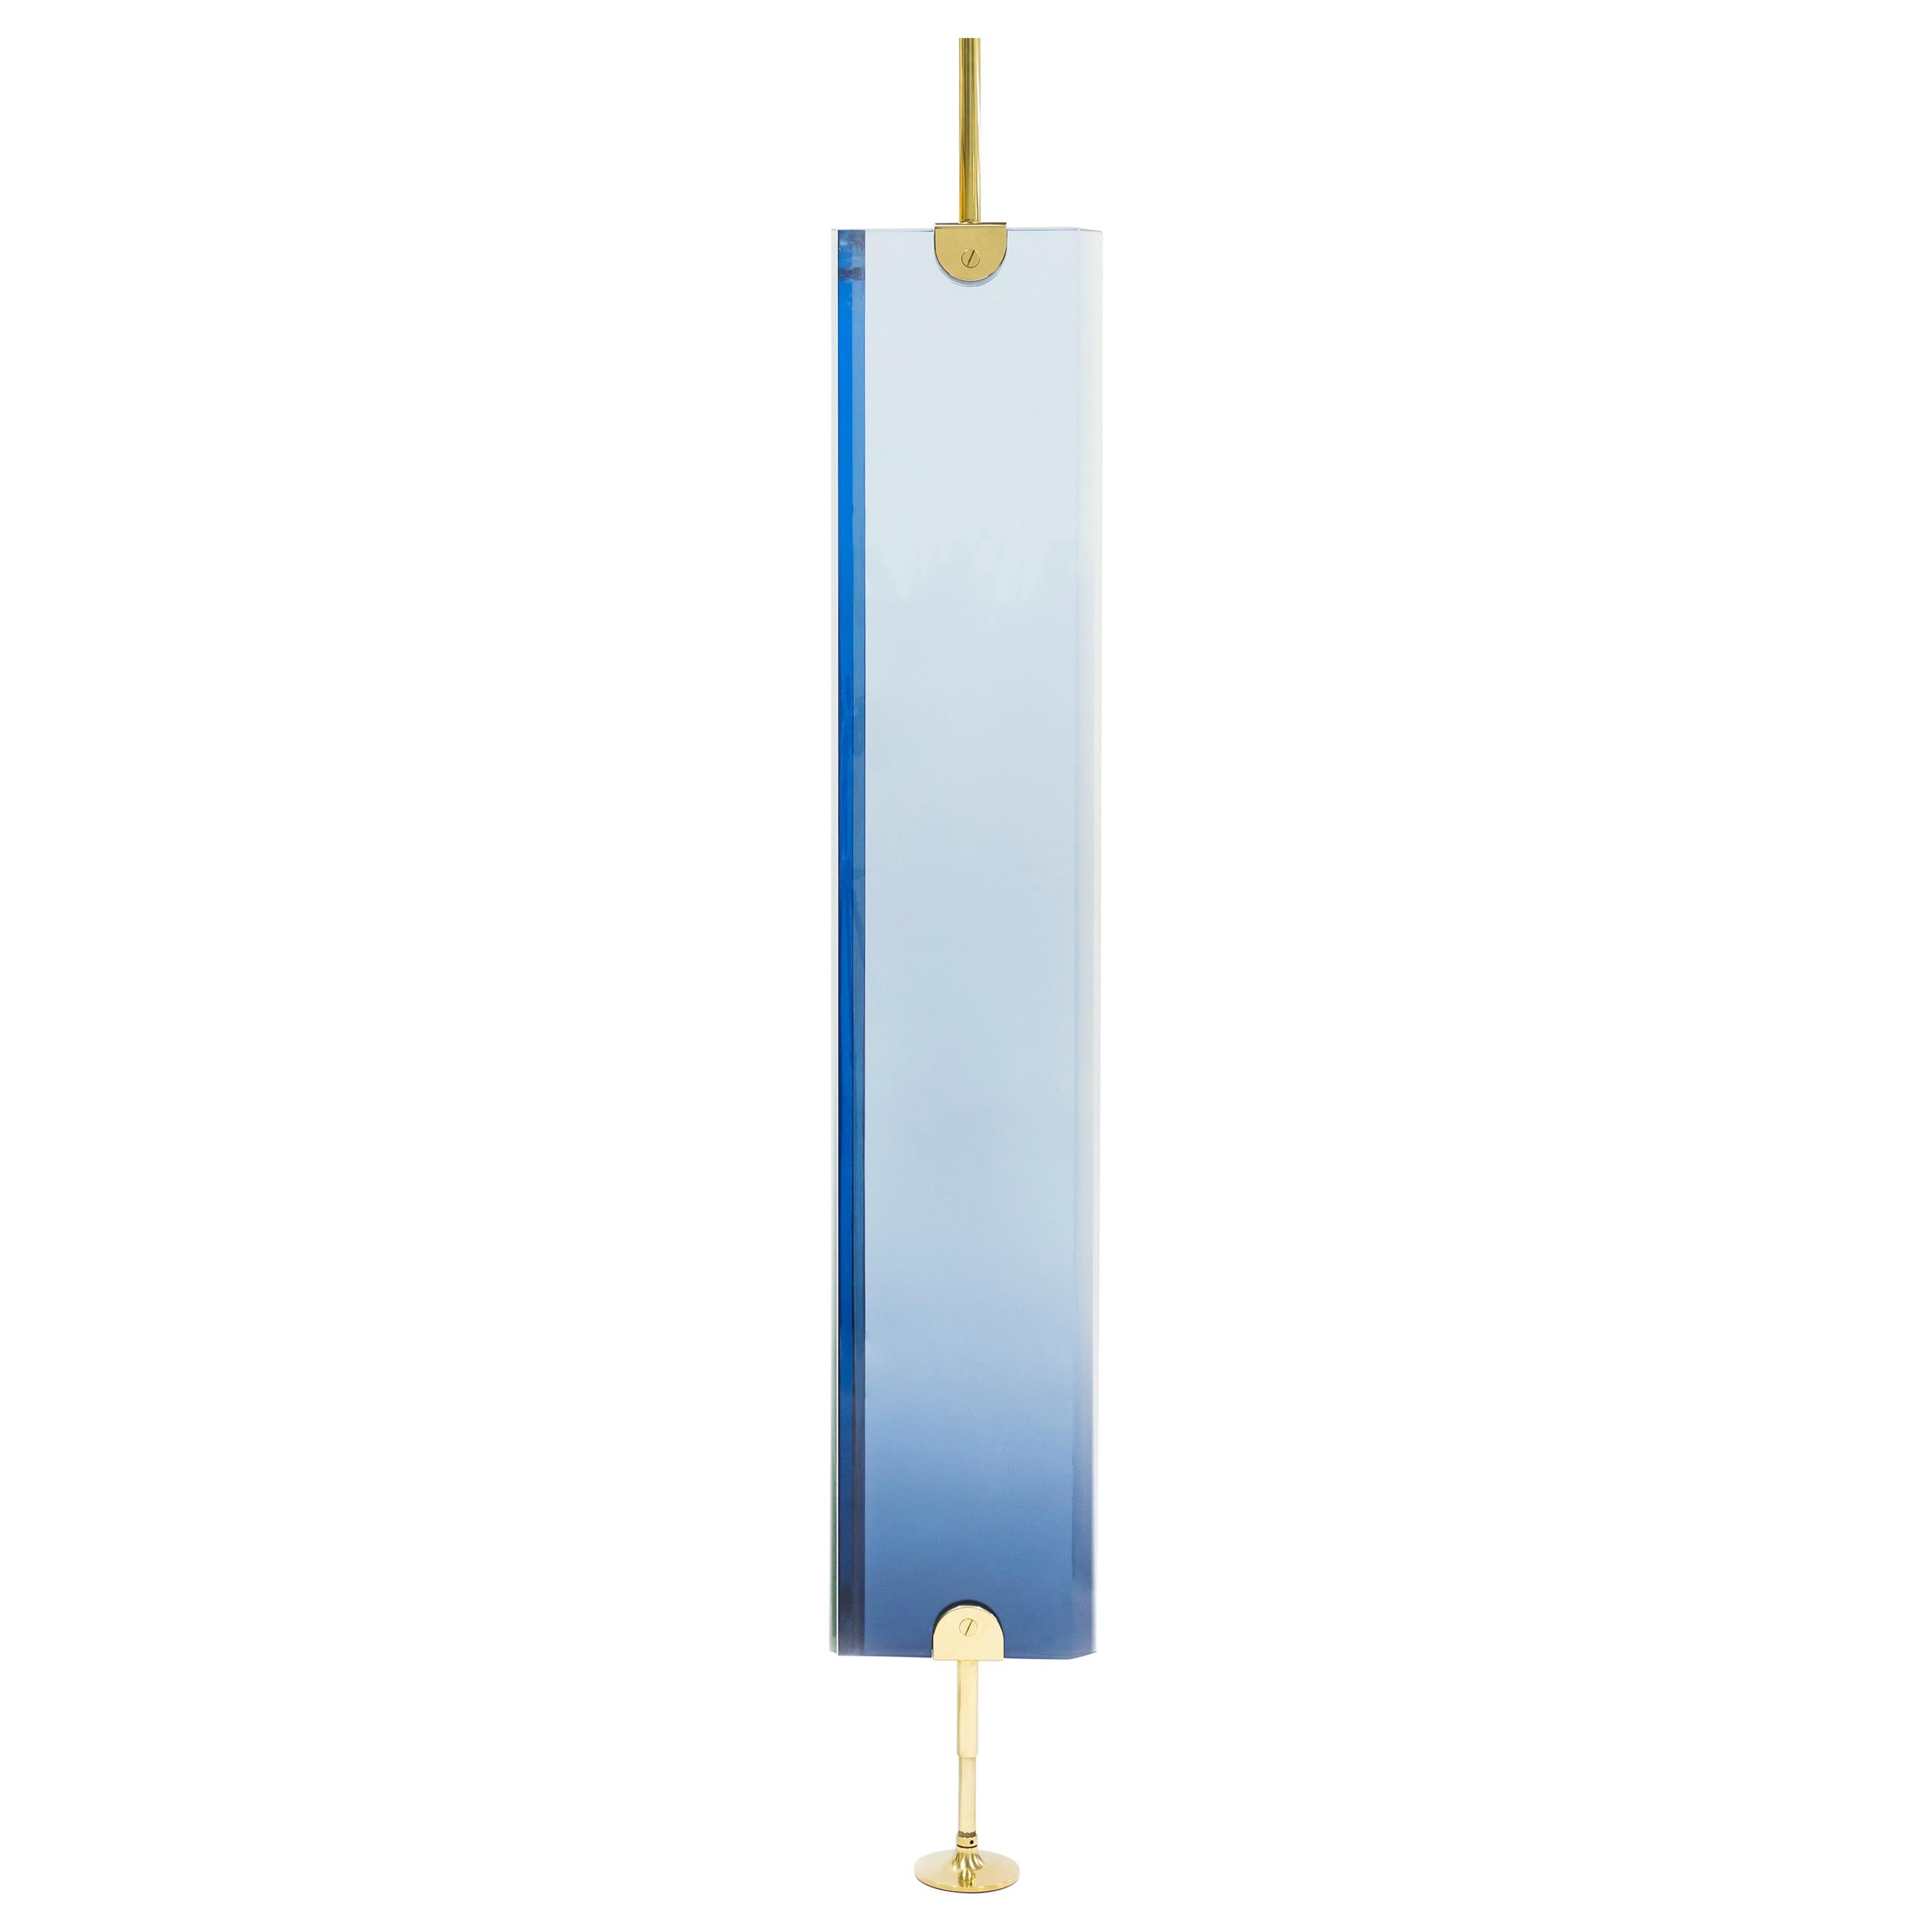 Reverso Separè Light Blue by Draga & Aurel Resin and Brass, 21st Century For Sale